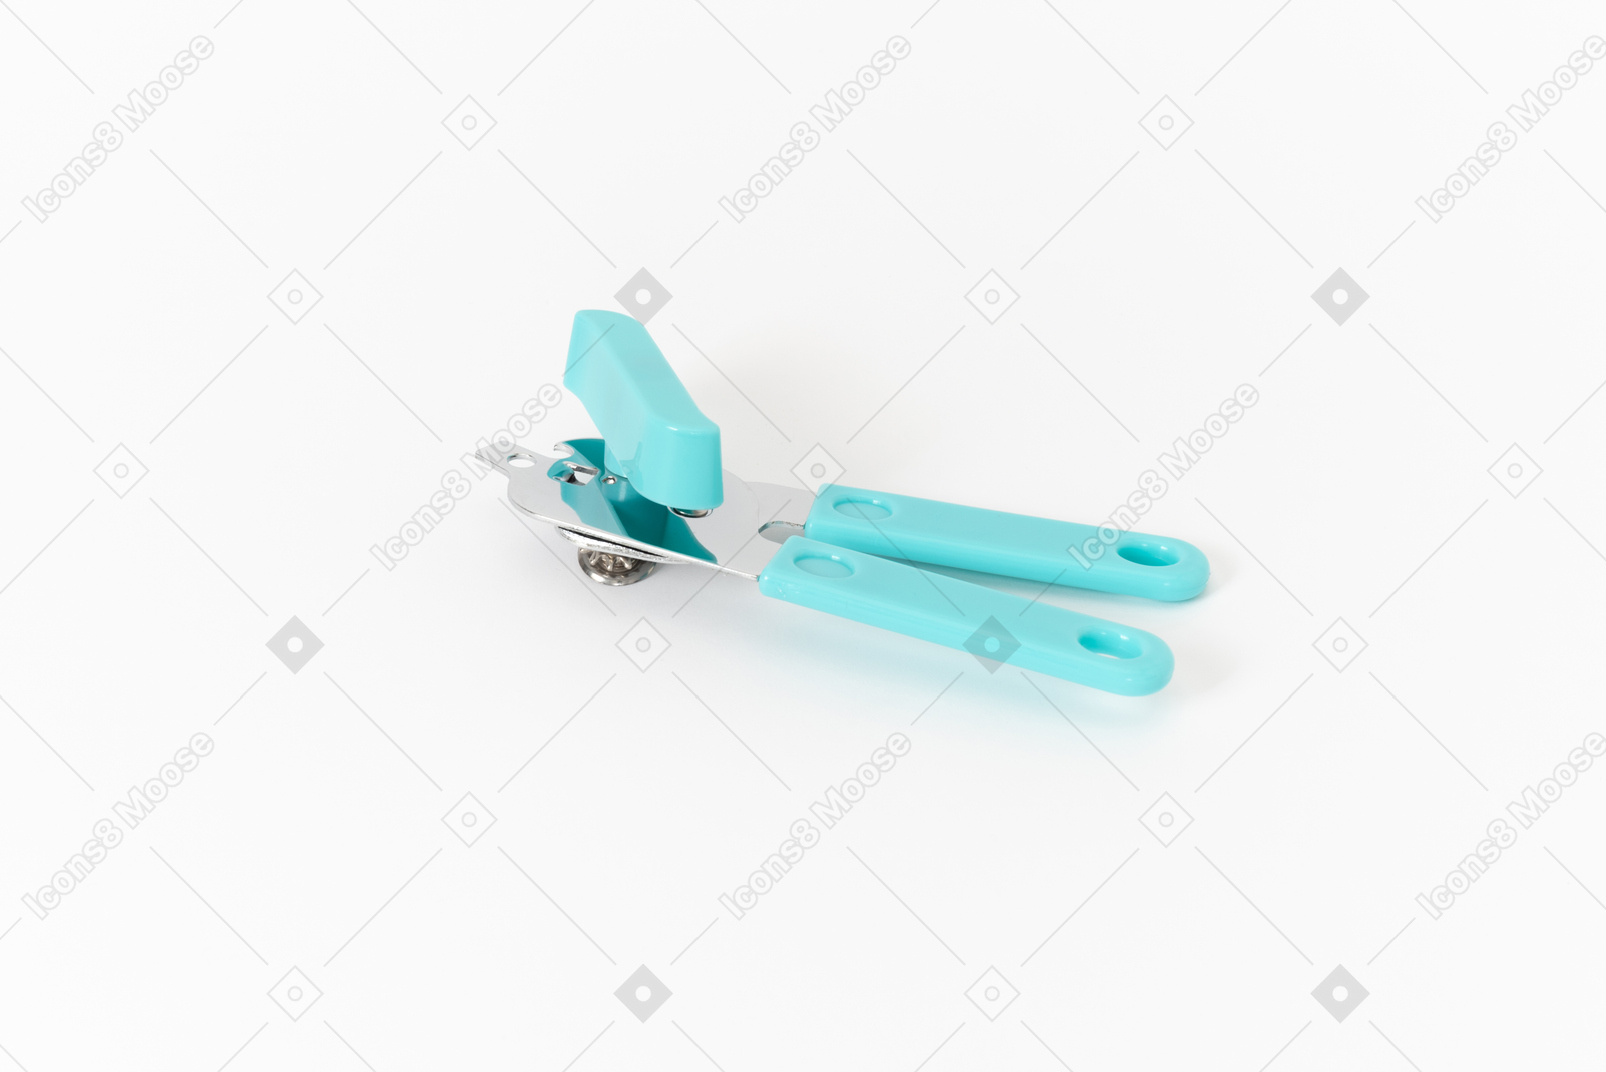 Blue can opener